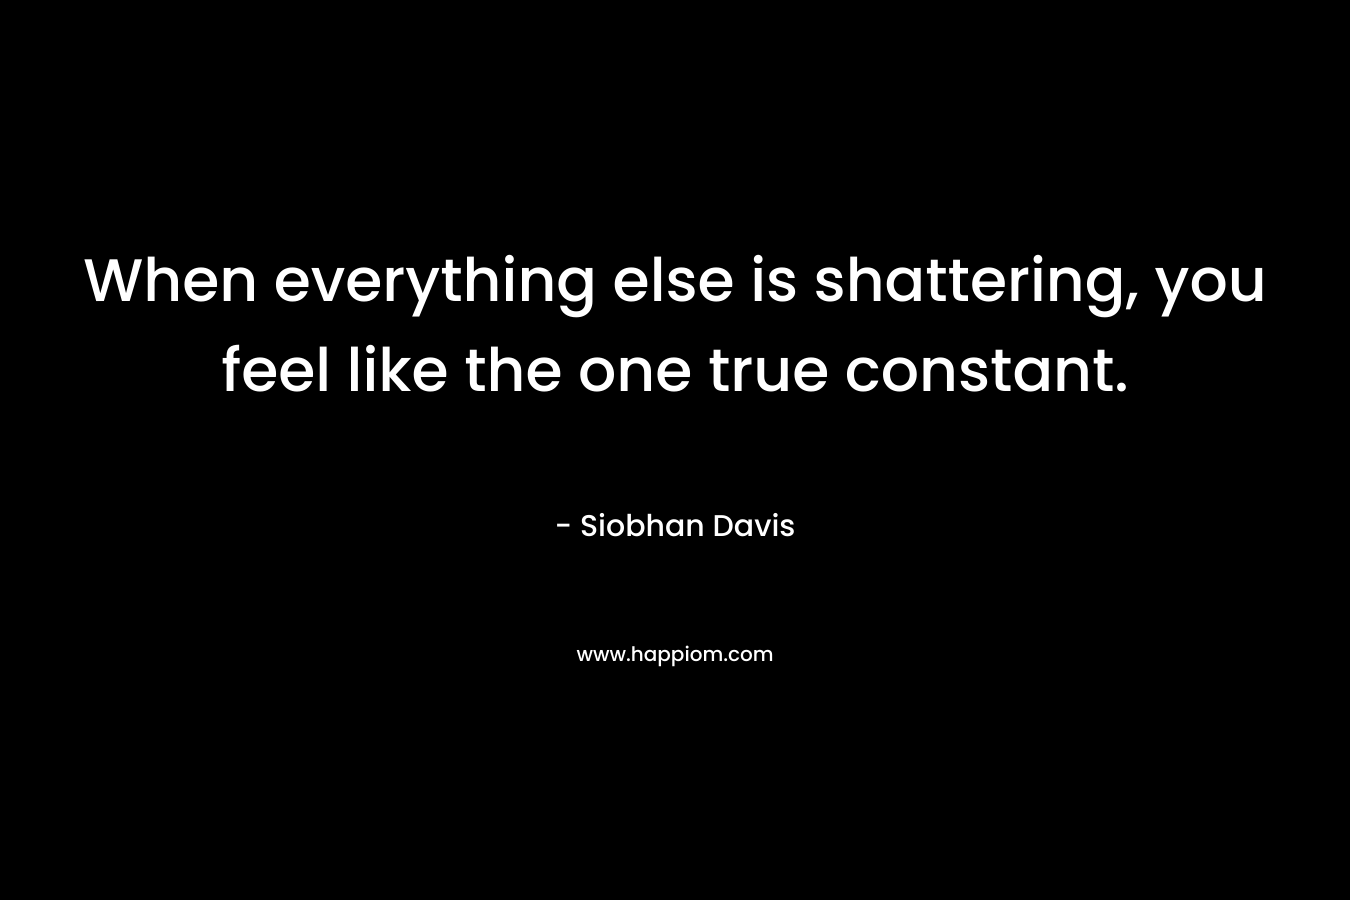 When everything else is shattering, you feel like the one true constant.